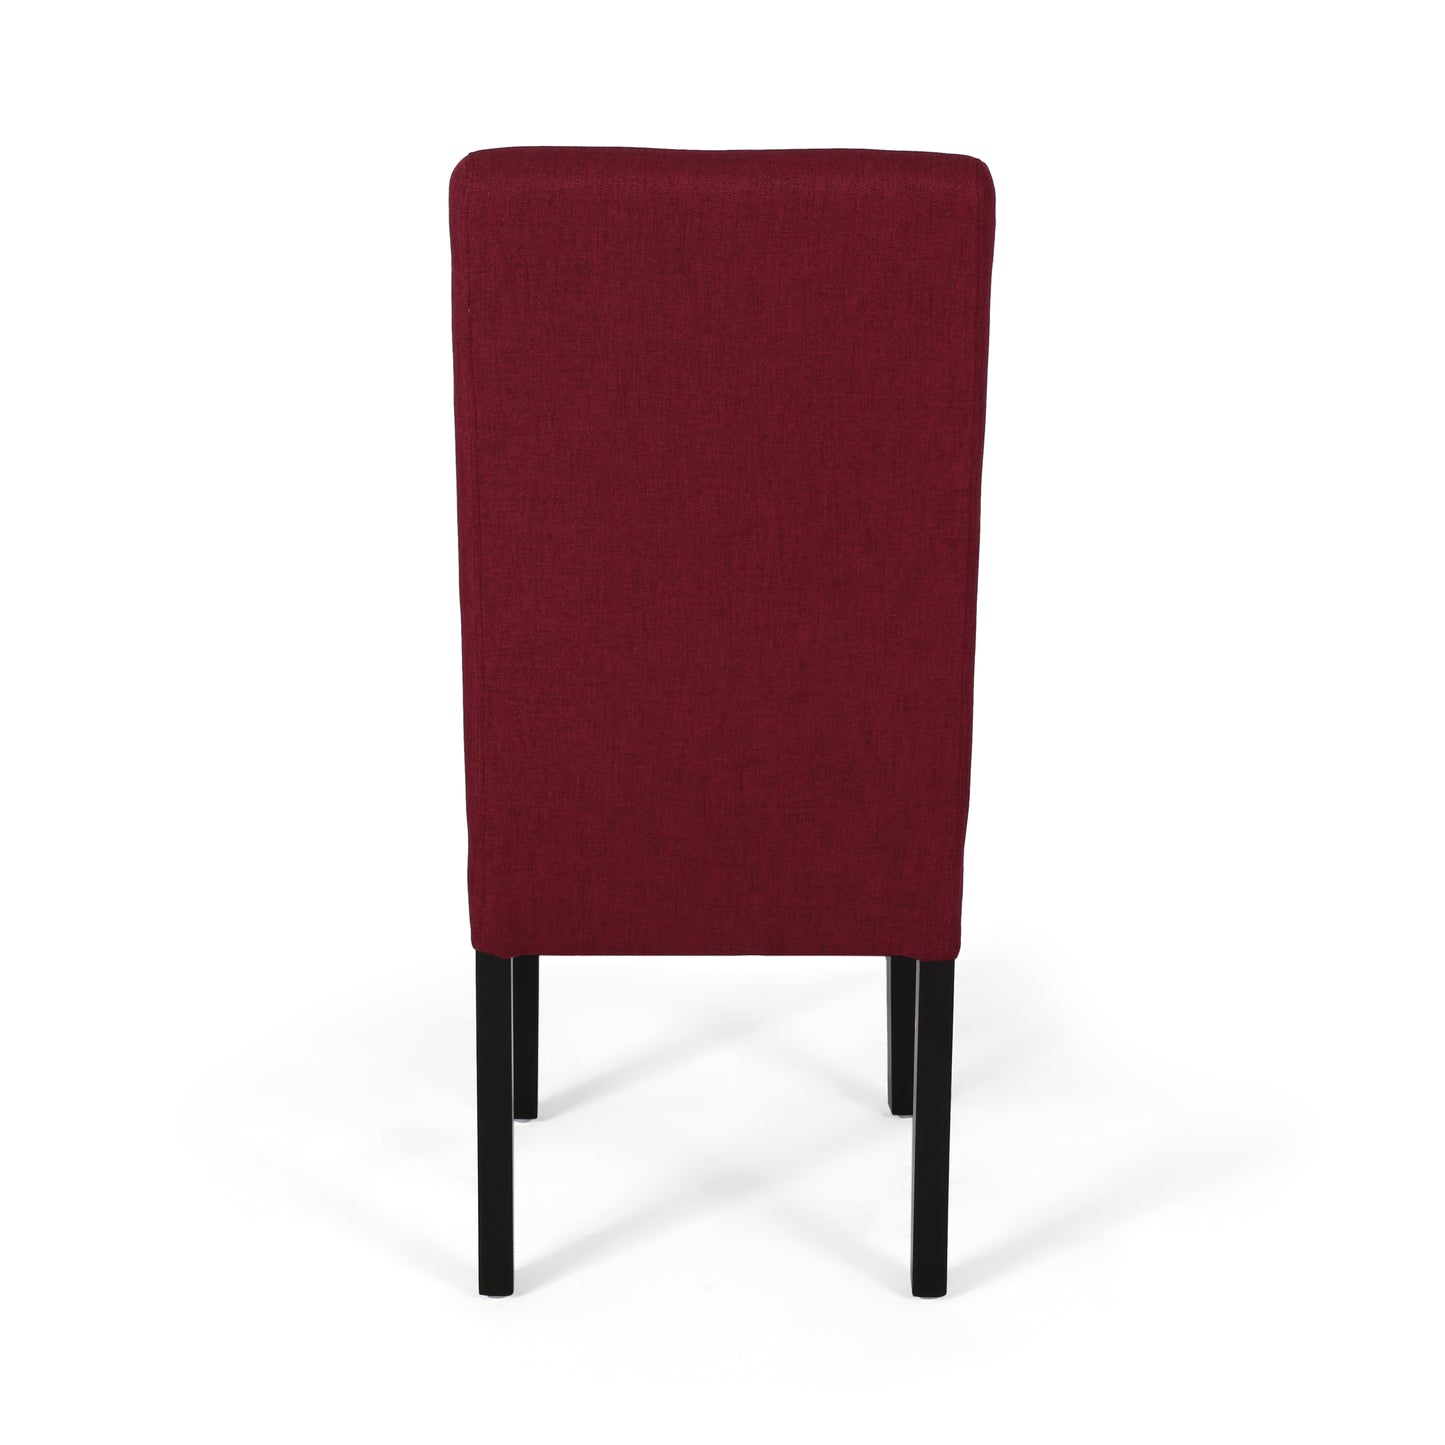 Raphael Wooden Dining Chairs (Set of 2), Deep Red and Dark Brown Finish